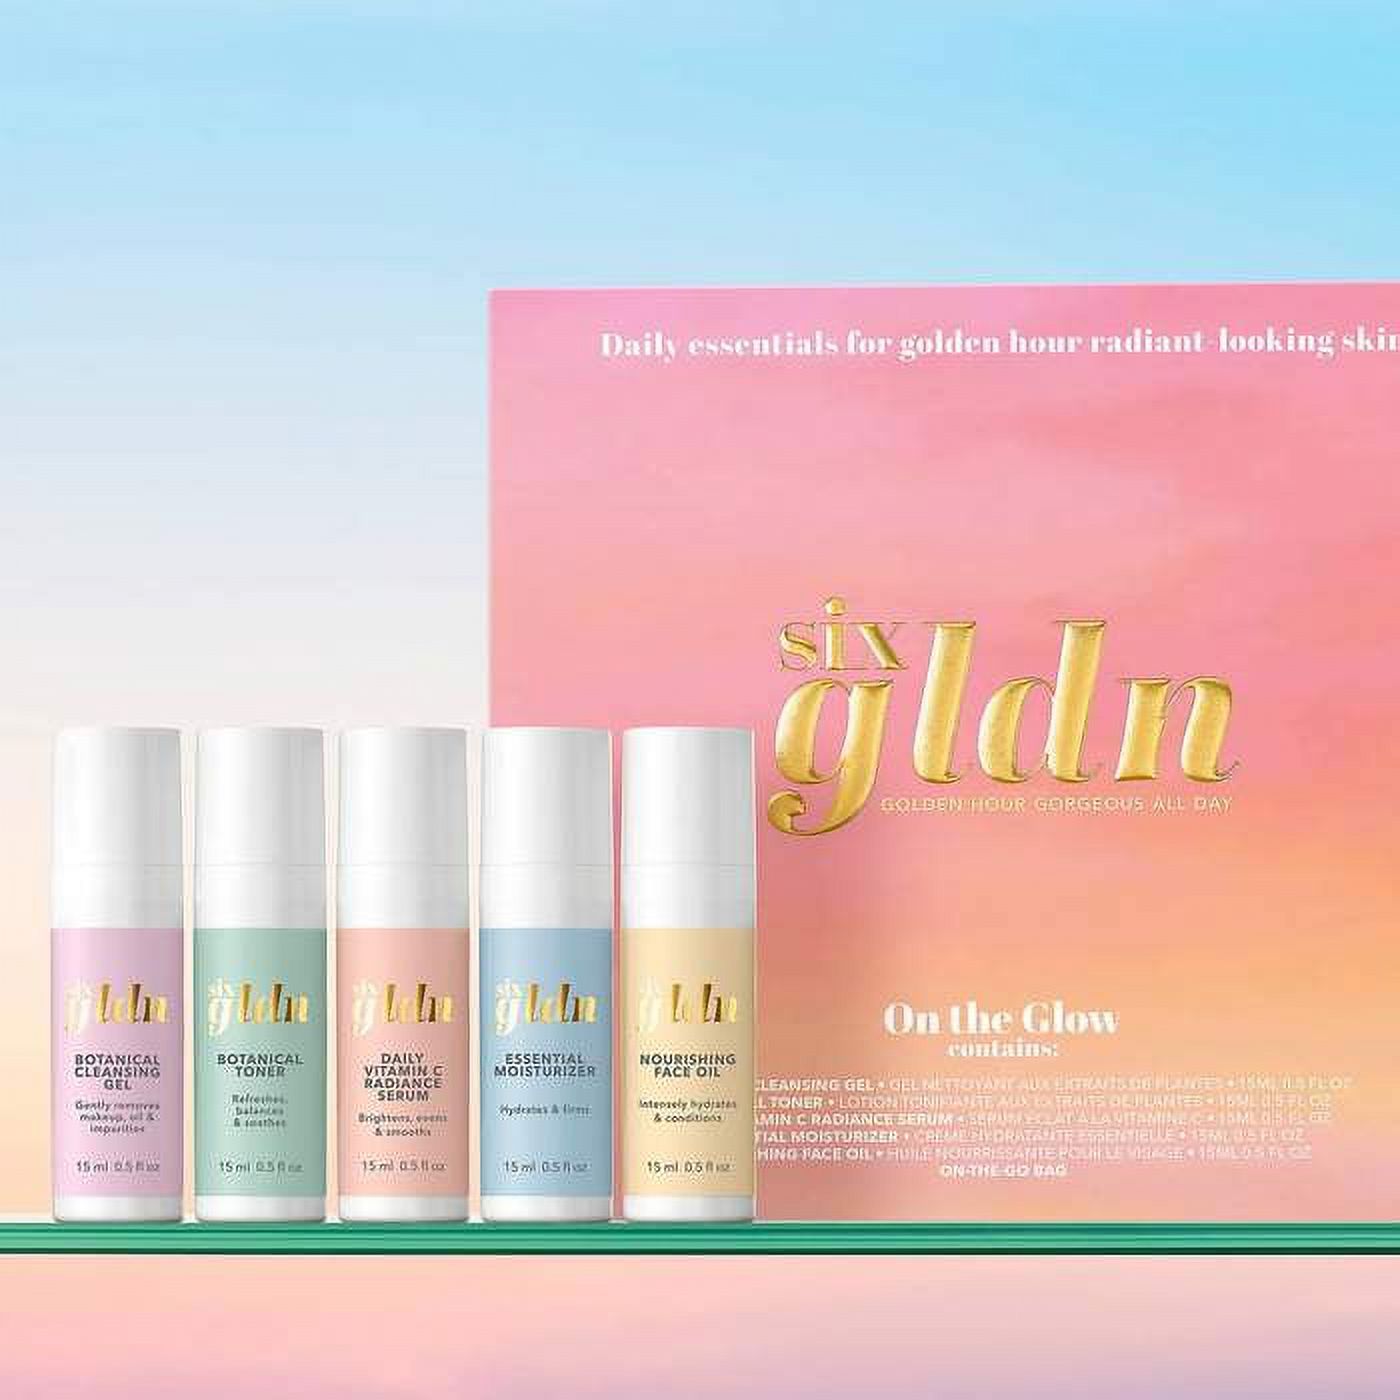 ($140 Value) Six Gldn On the Glow Skin Care Set, For All Skin Types - image 1 of 10